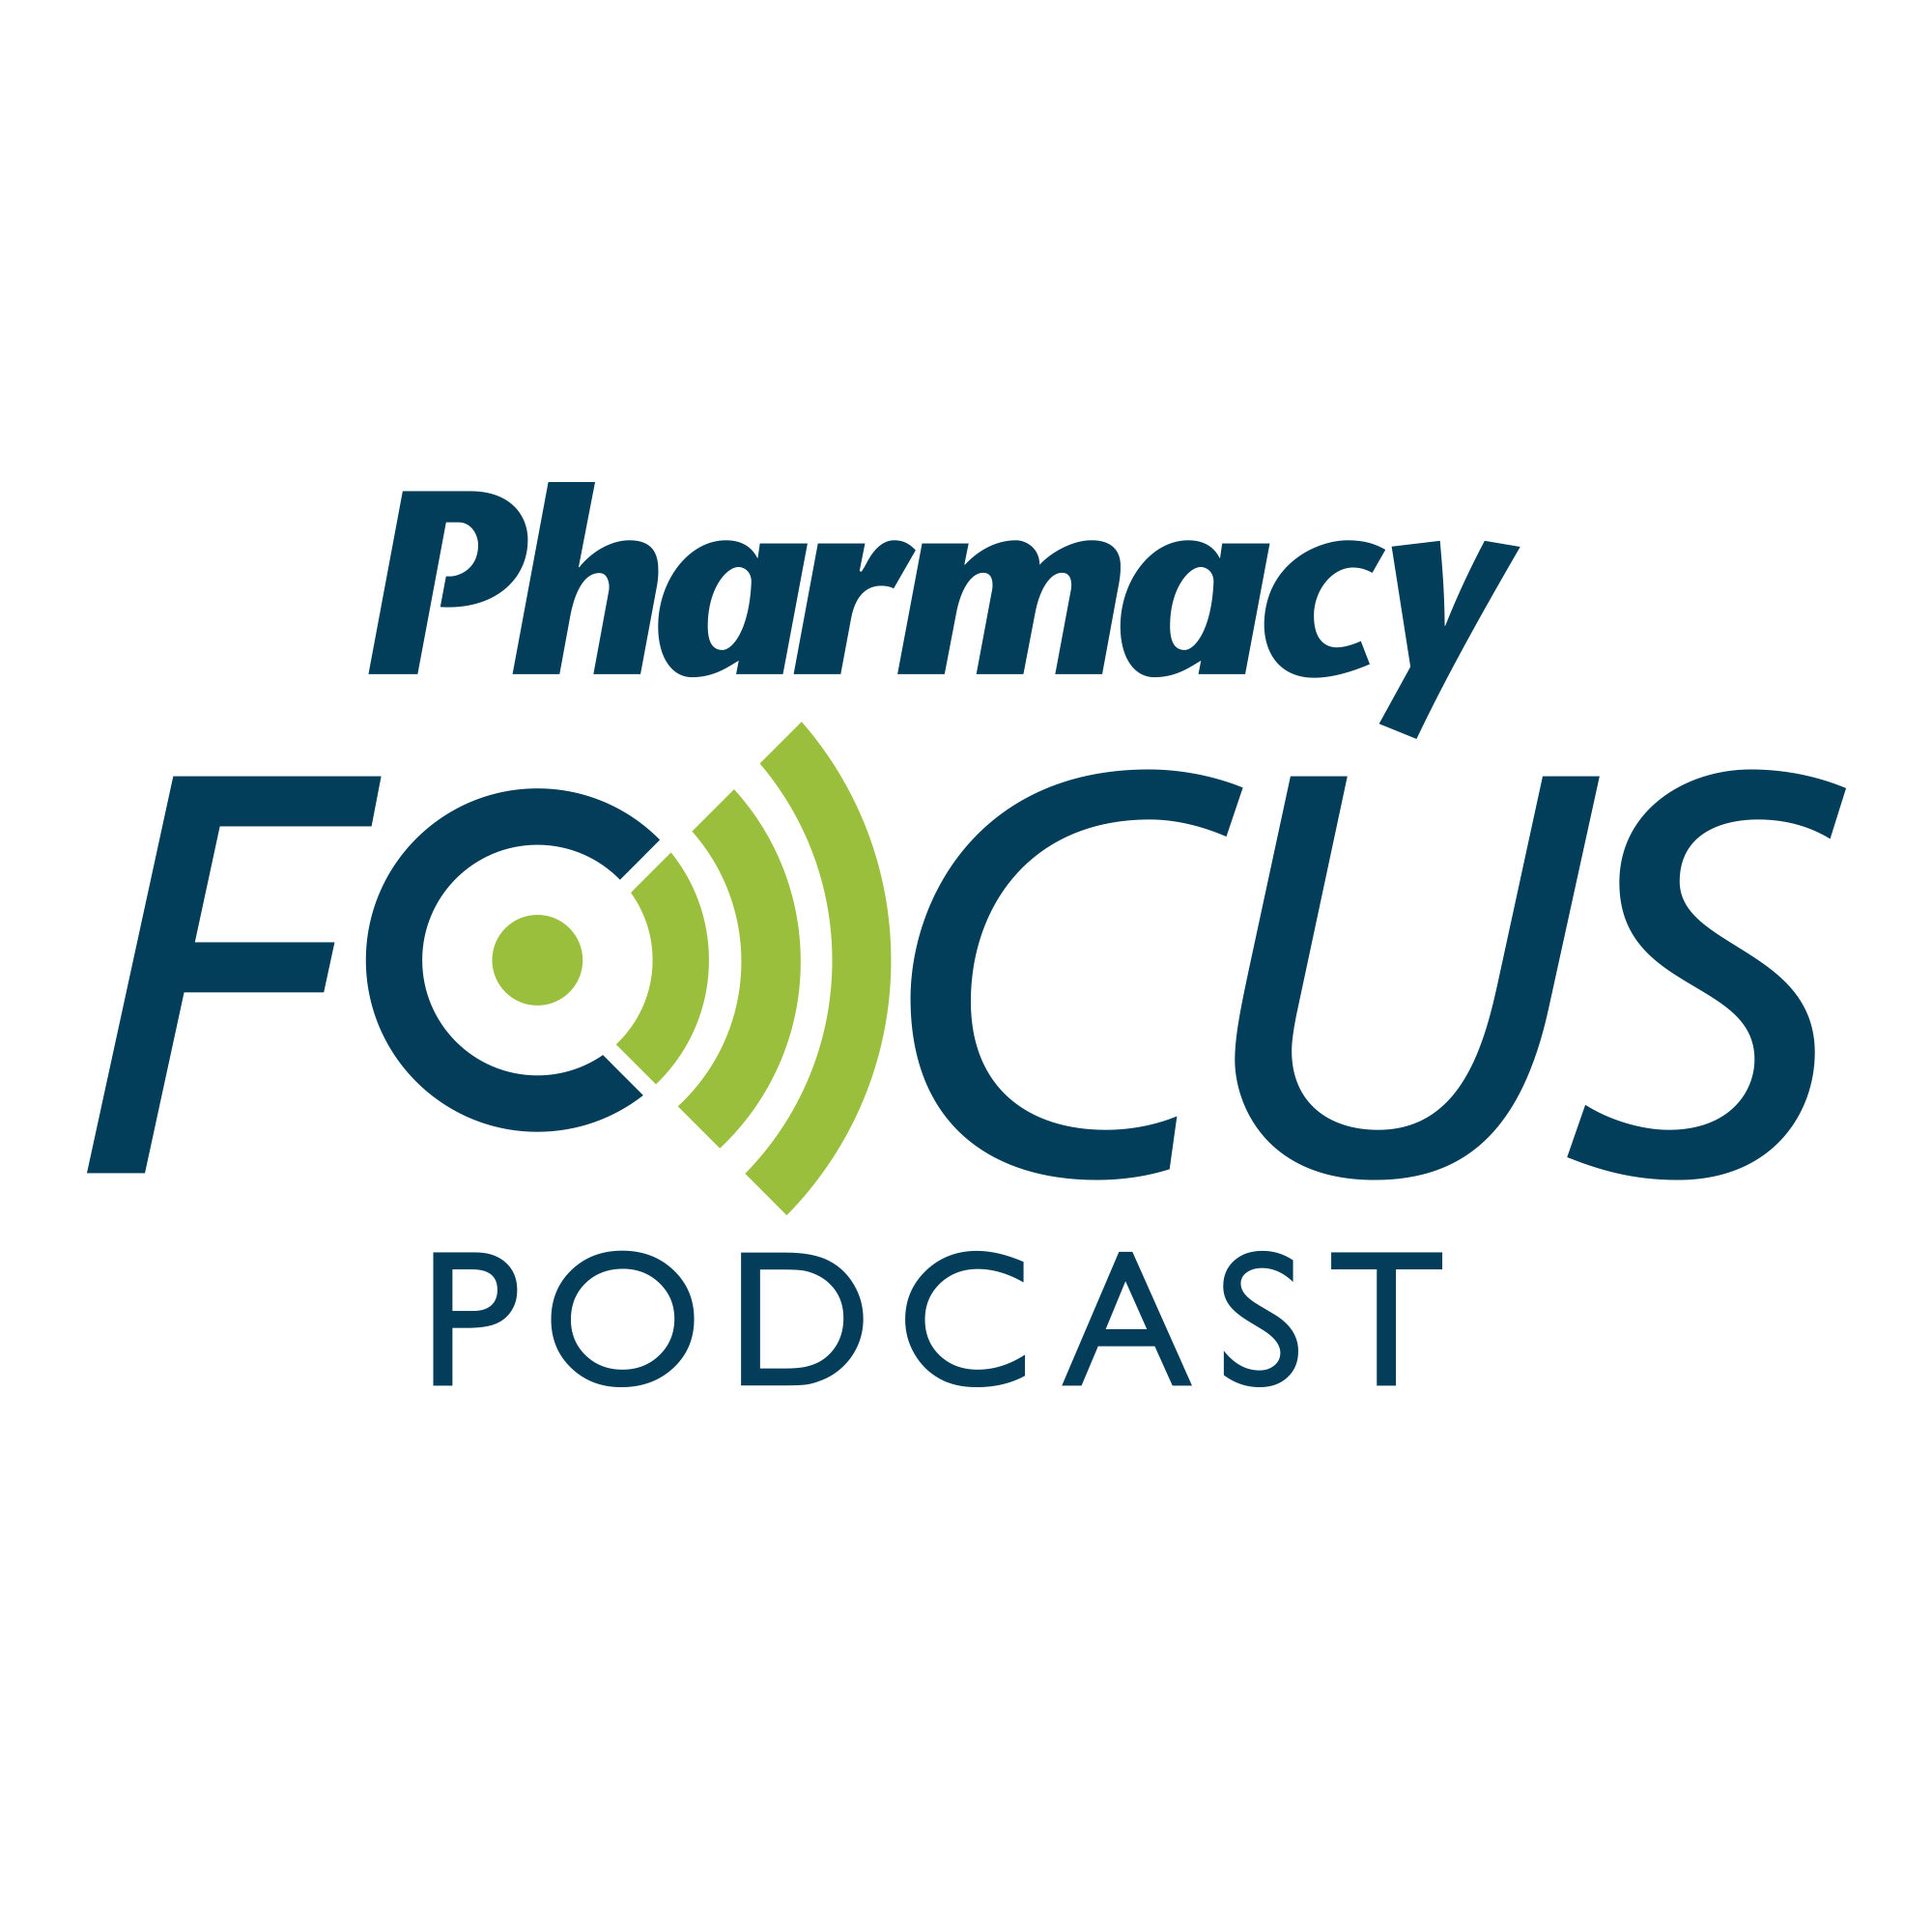 Pharmacy Focus Episode 20: Medication Misuse and The Future of Pharmacy in 2021